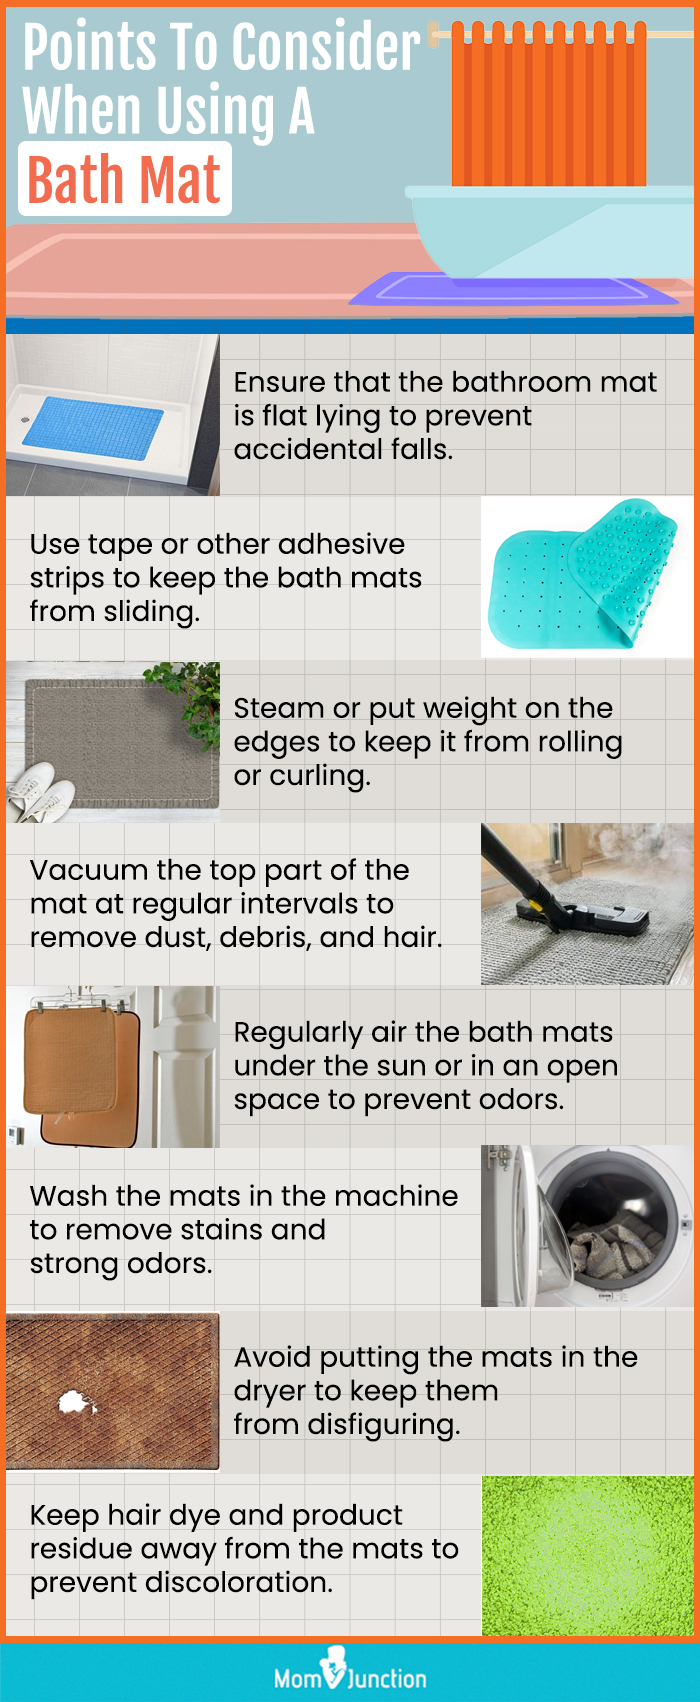 Points To Consider When Using A Bath Mat (infographic)